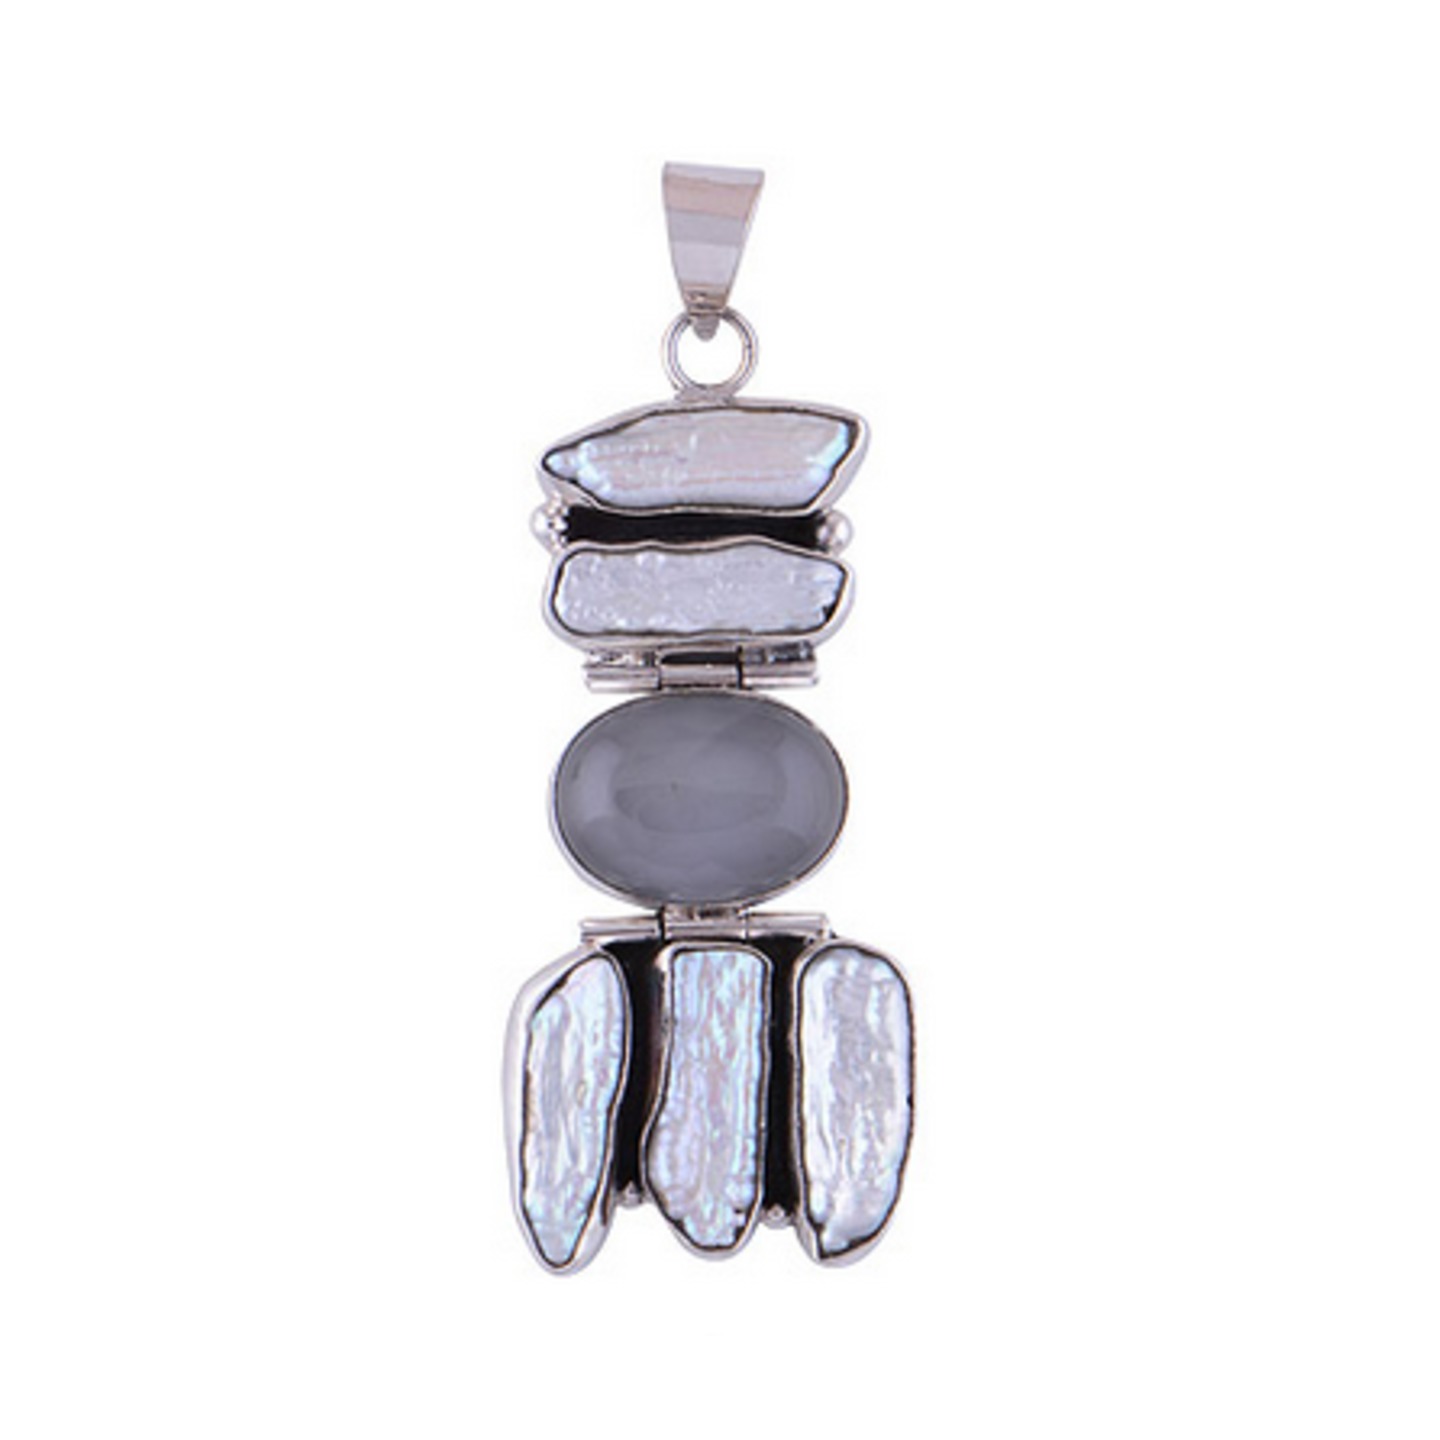 The Chalcedony Blue & Shell Silver Pendant